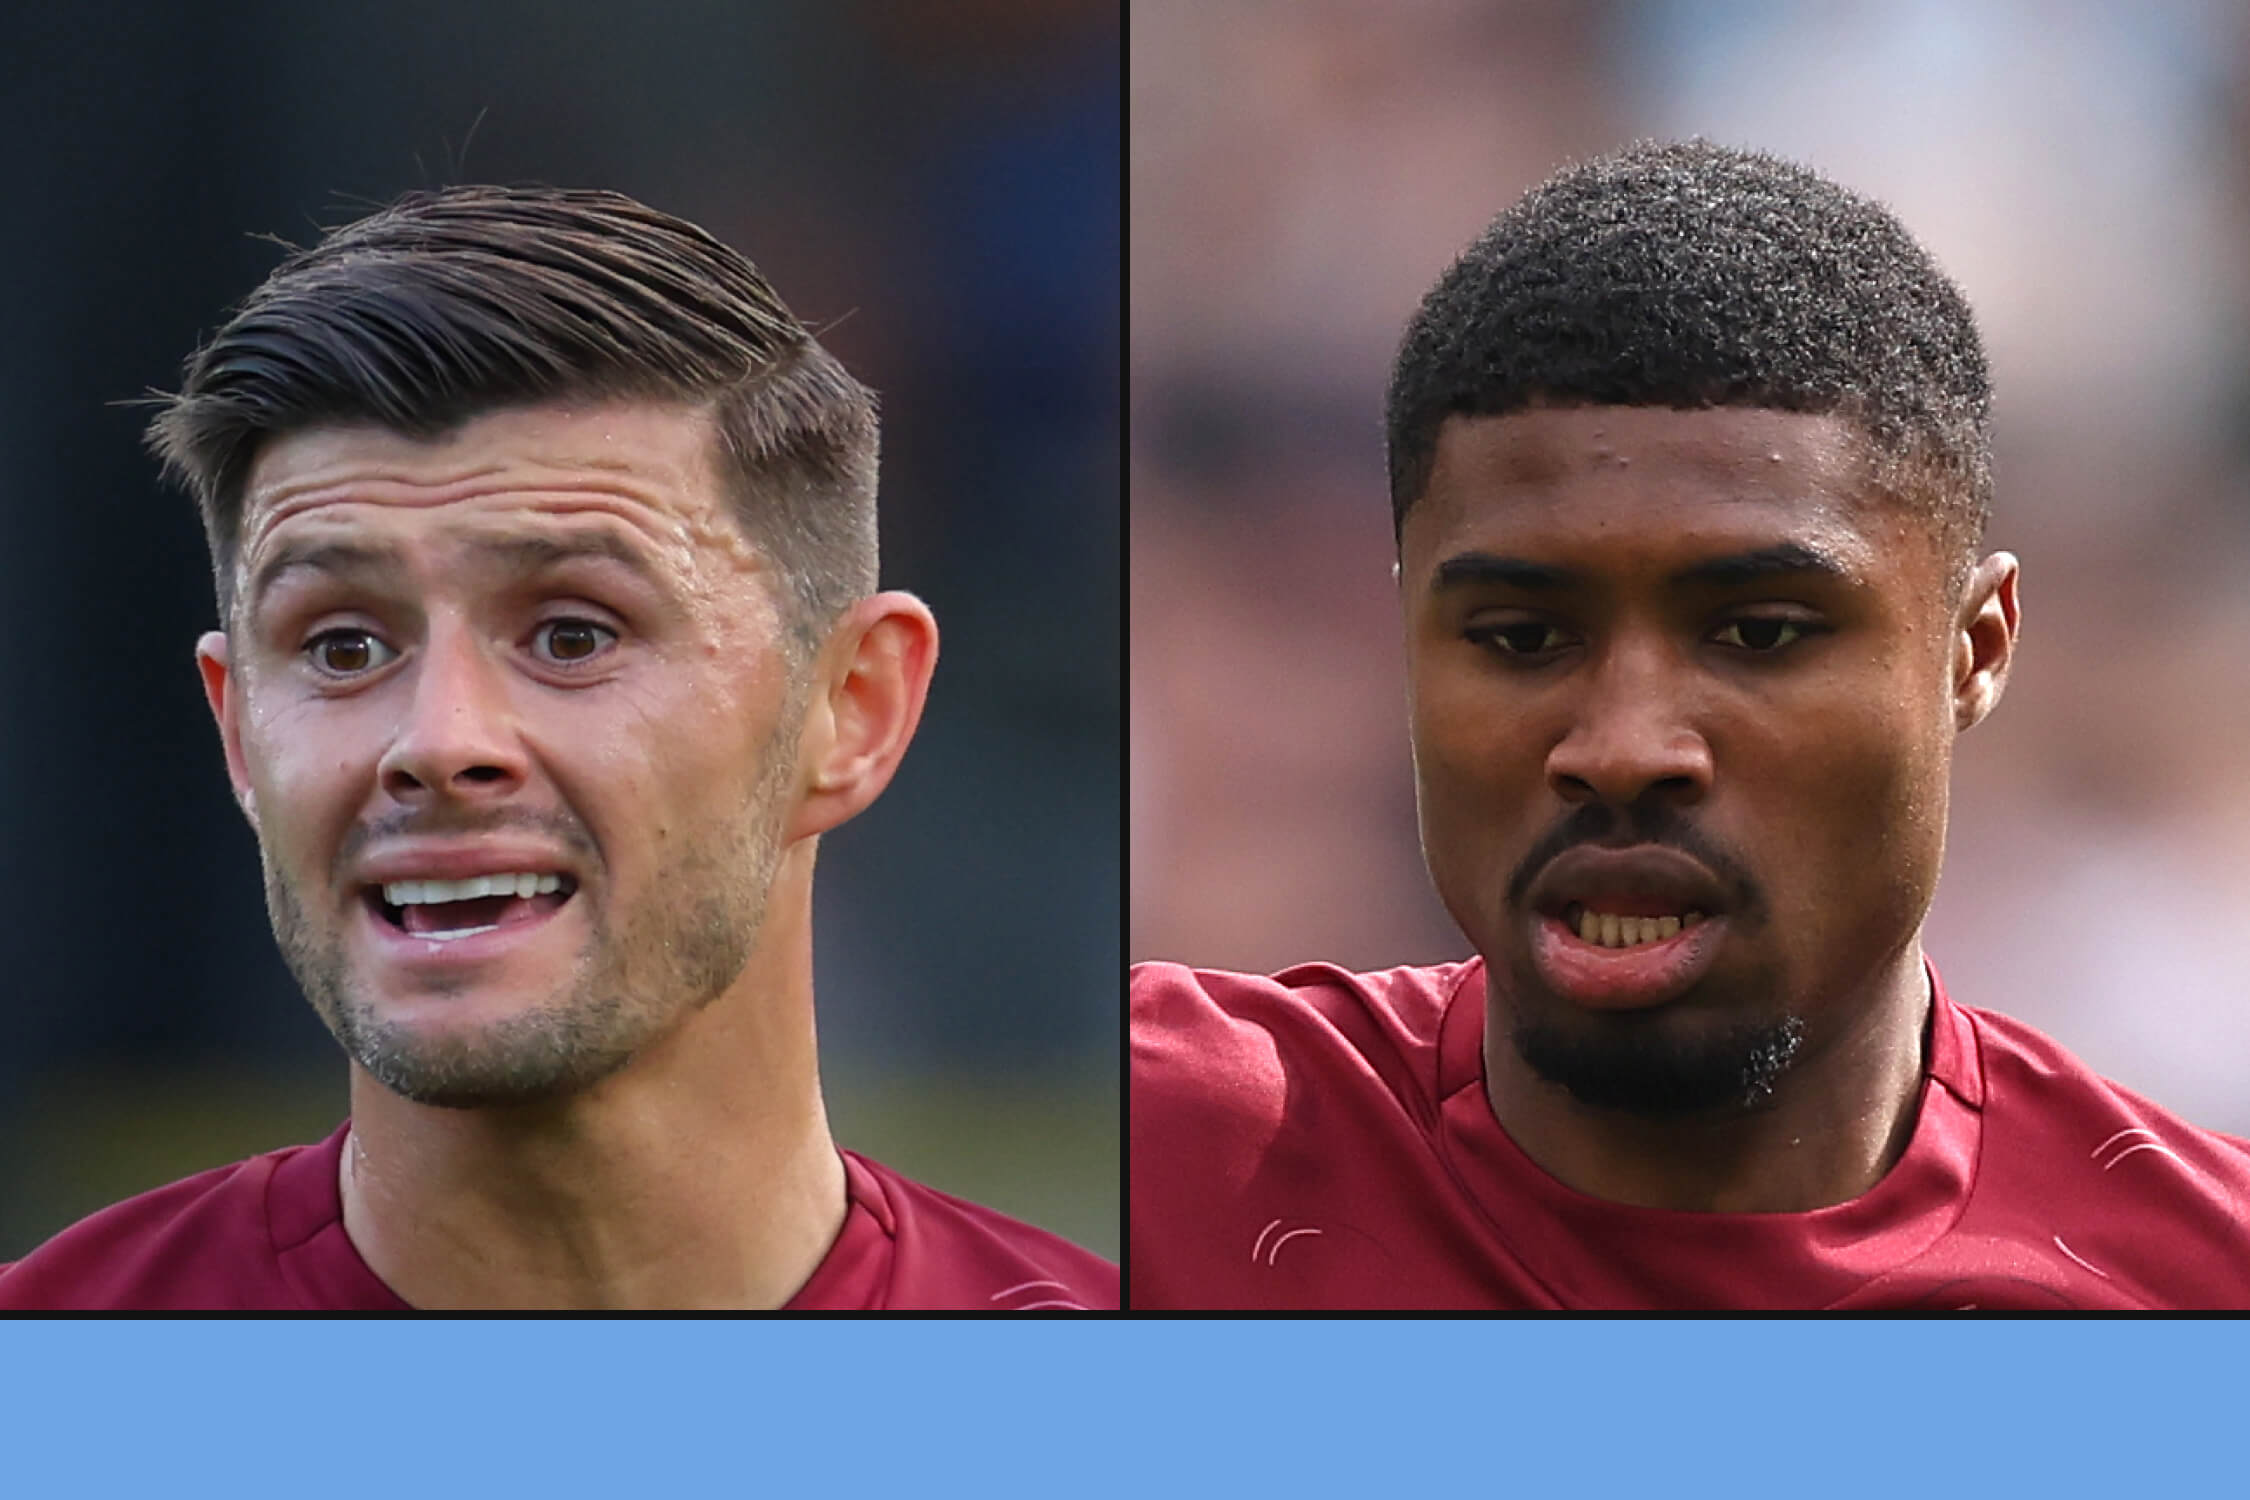 West Ham United hopeful Aaron Cresswell will stay, Ben Johnson expected to leave